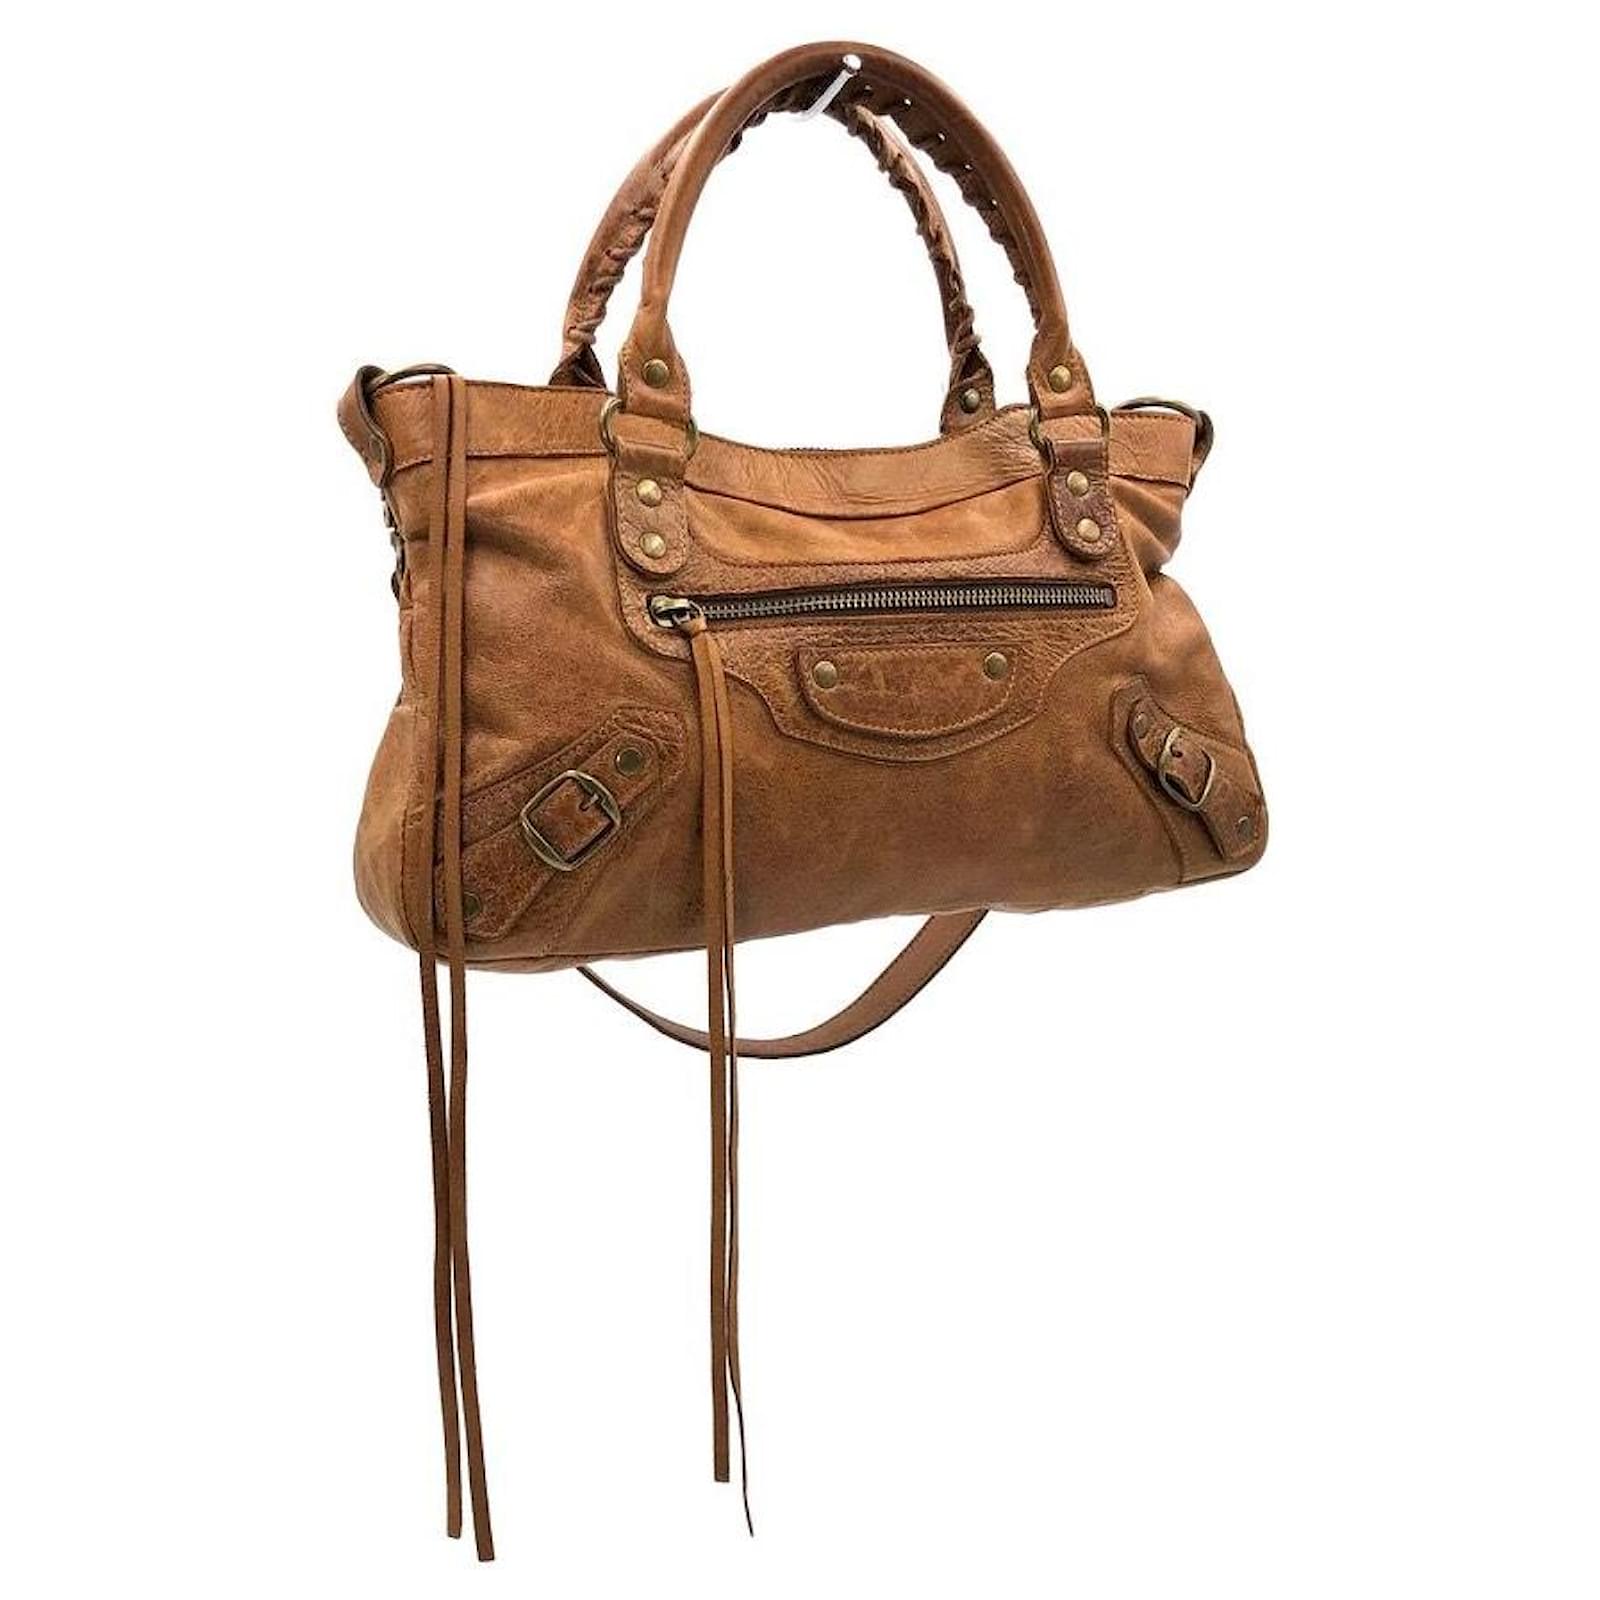 Brown - The - 2Way - Hand - ep_vintage luxury Store - BALENCIAGA -  Calicanto Peggy leather bucket bag - Bag - Bag - City - Giant - 173084 –  dct - Leather